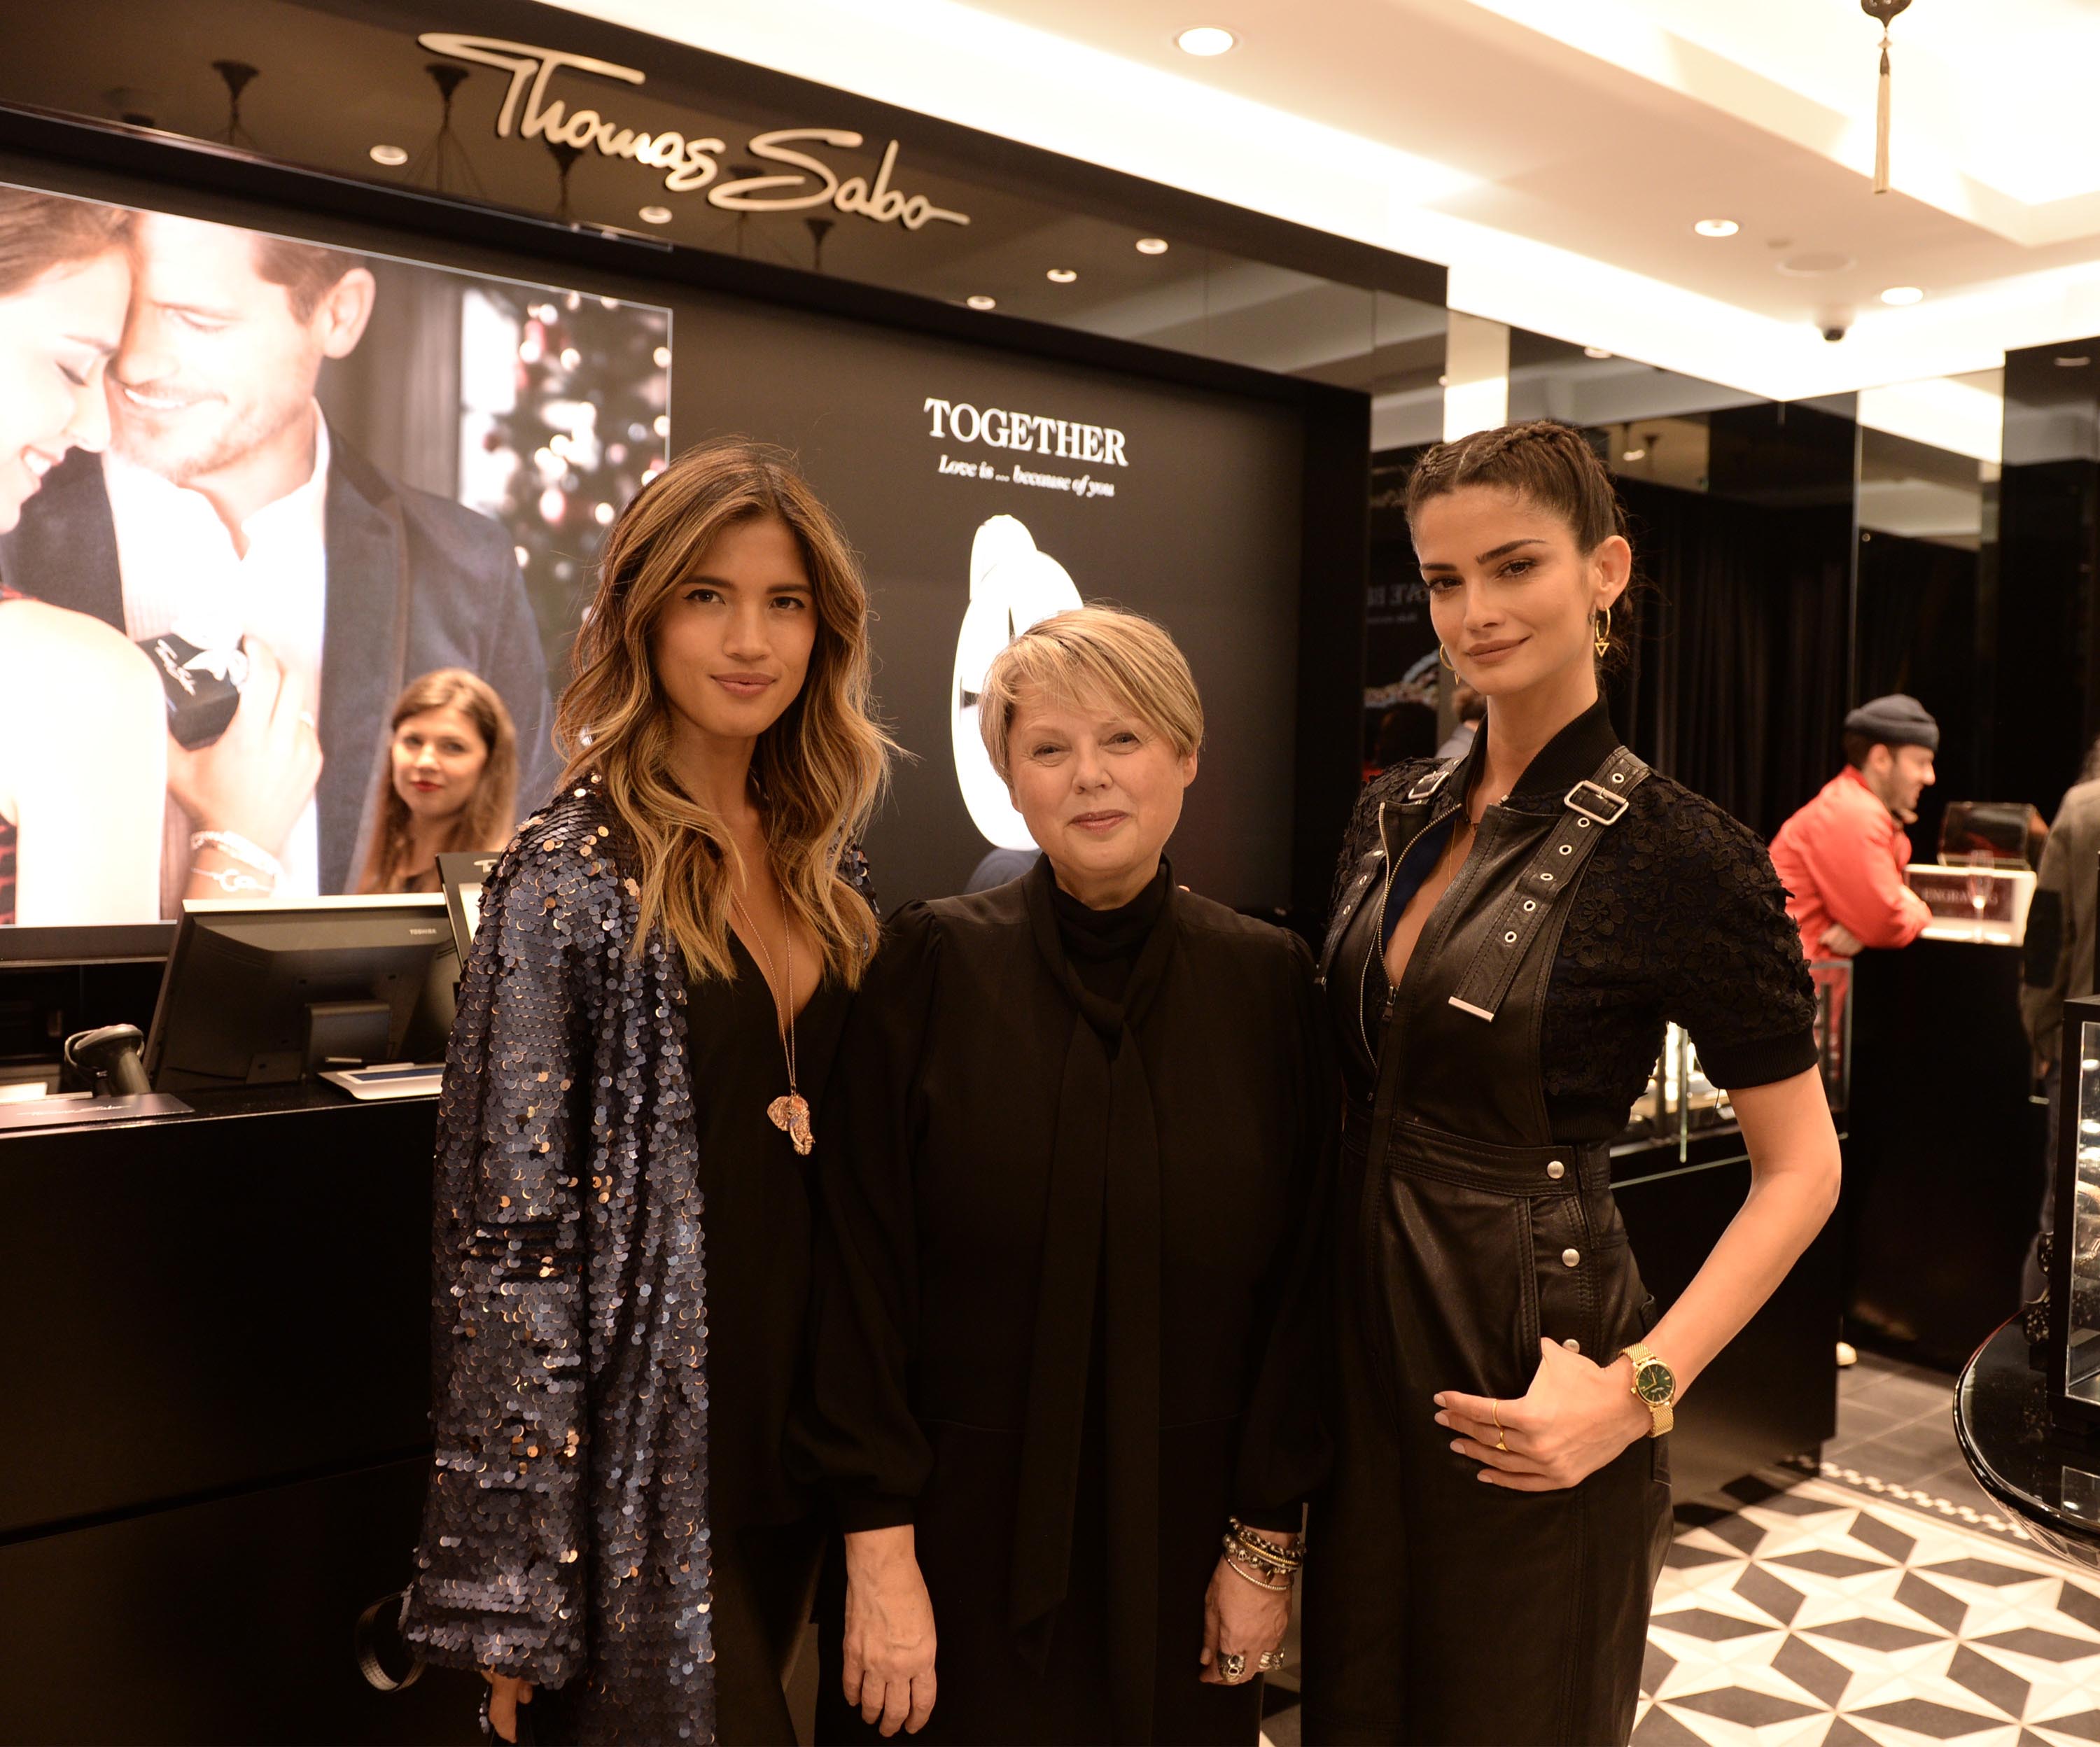 Shermine Shahrivar attends the Thomas Sabo flagship boutique grand opening